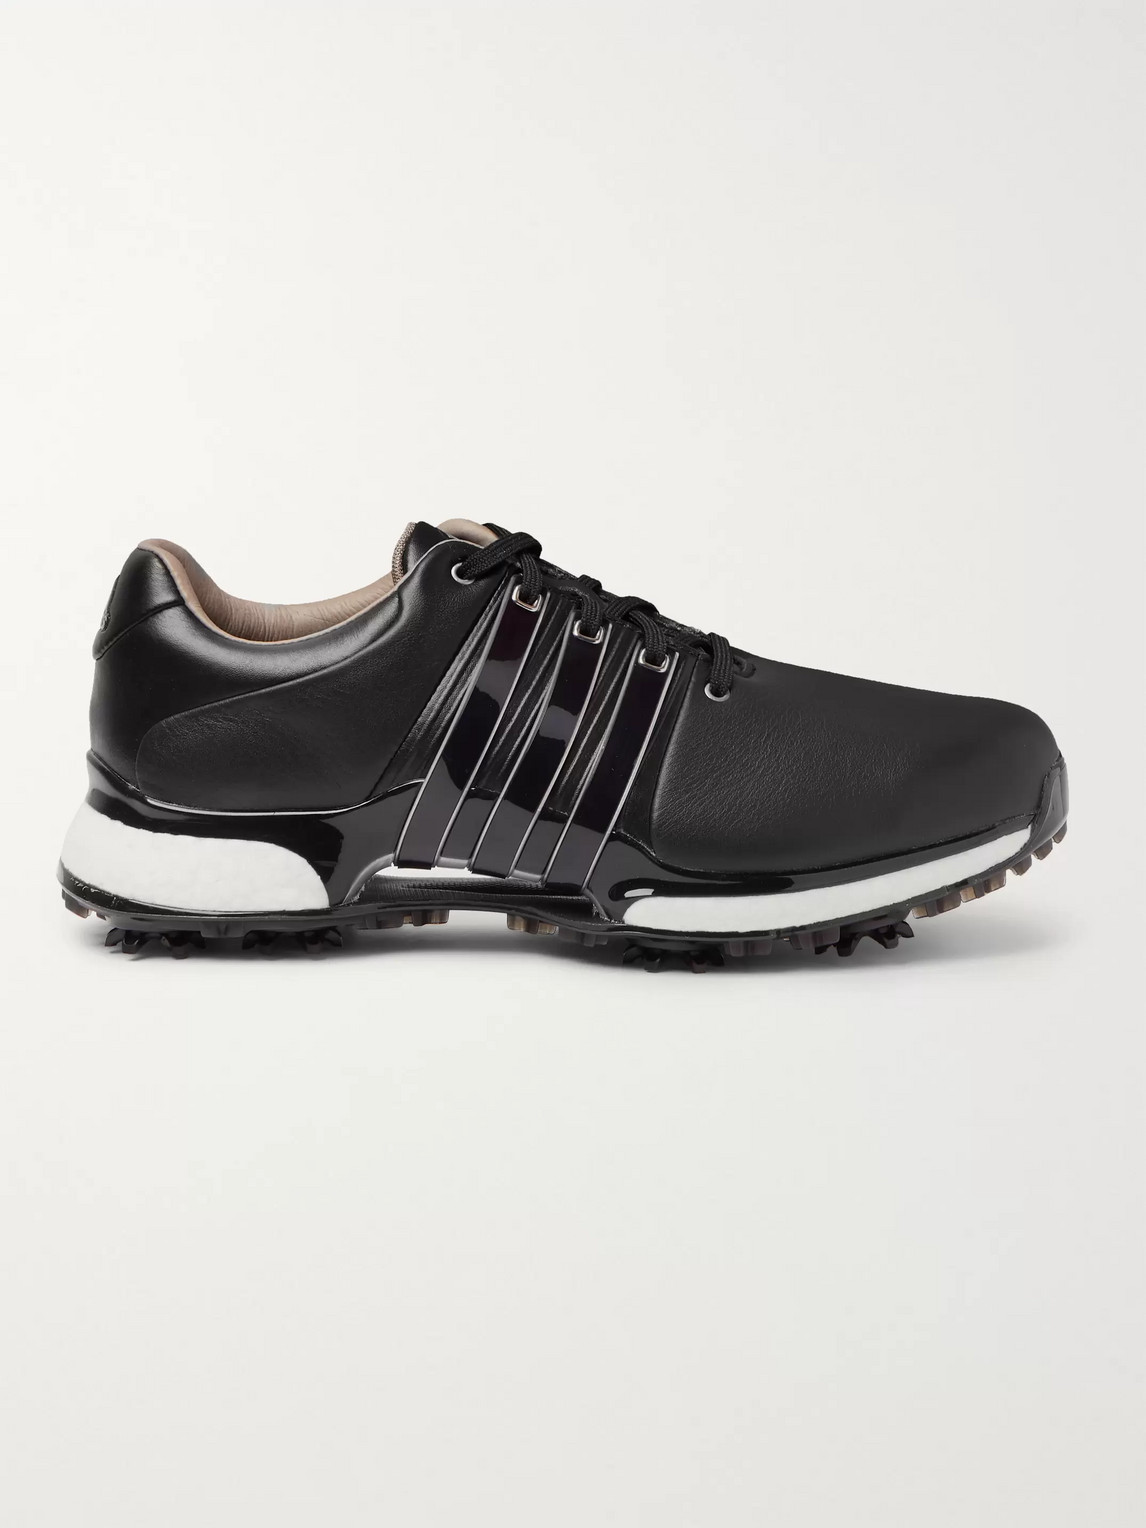 Adidas Golf Tour360 Xt Pvc And Rubber-trimmed Leather Golf Sneakers In Black